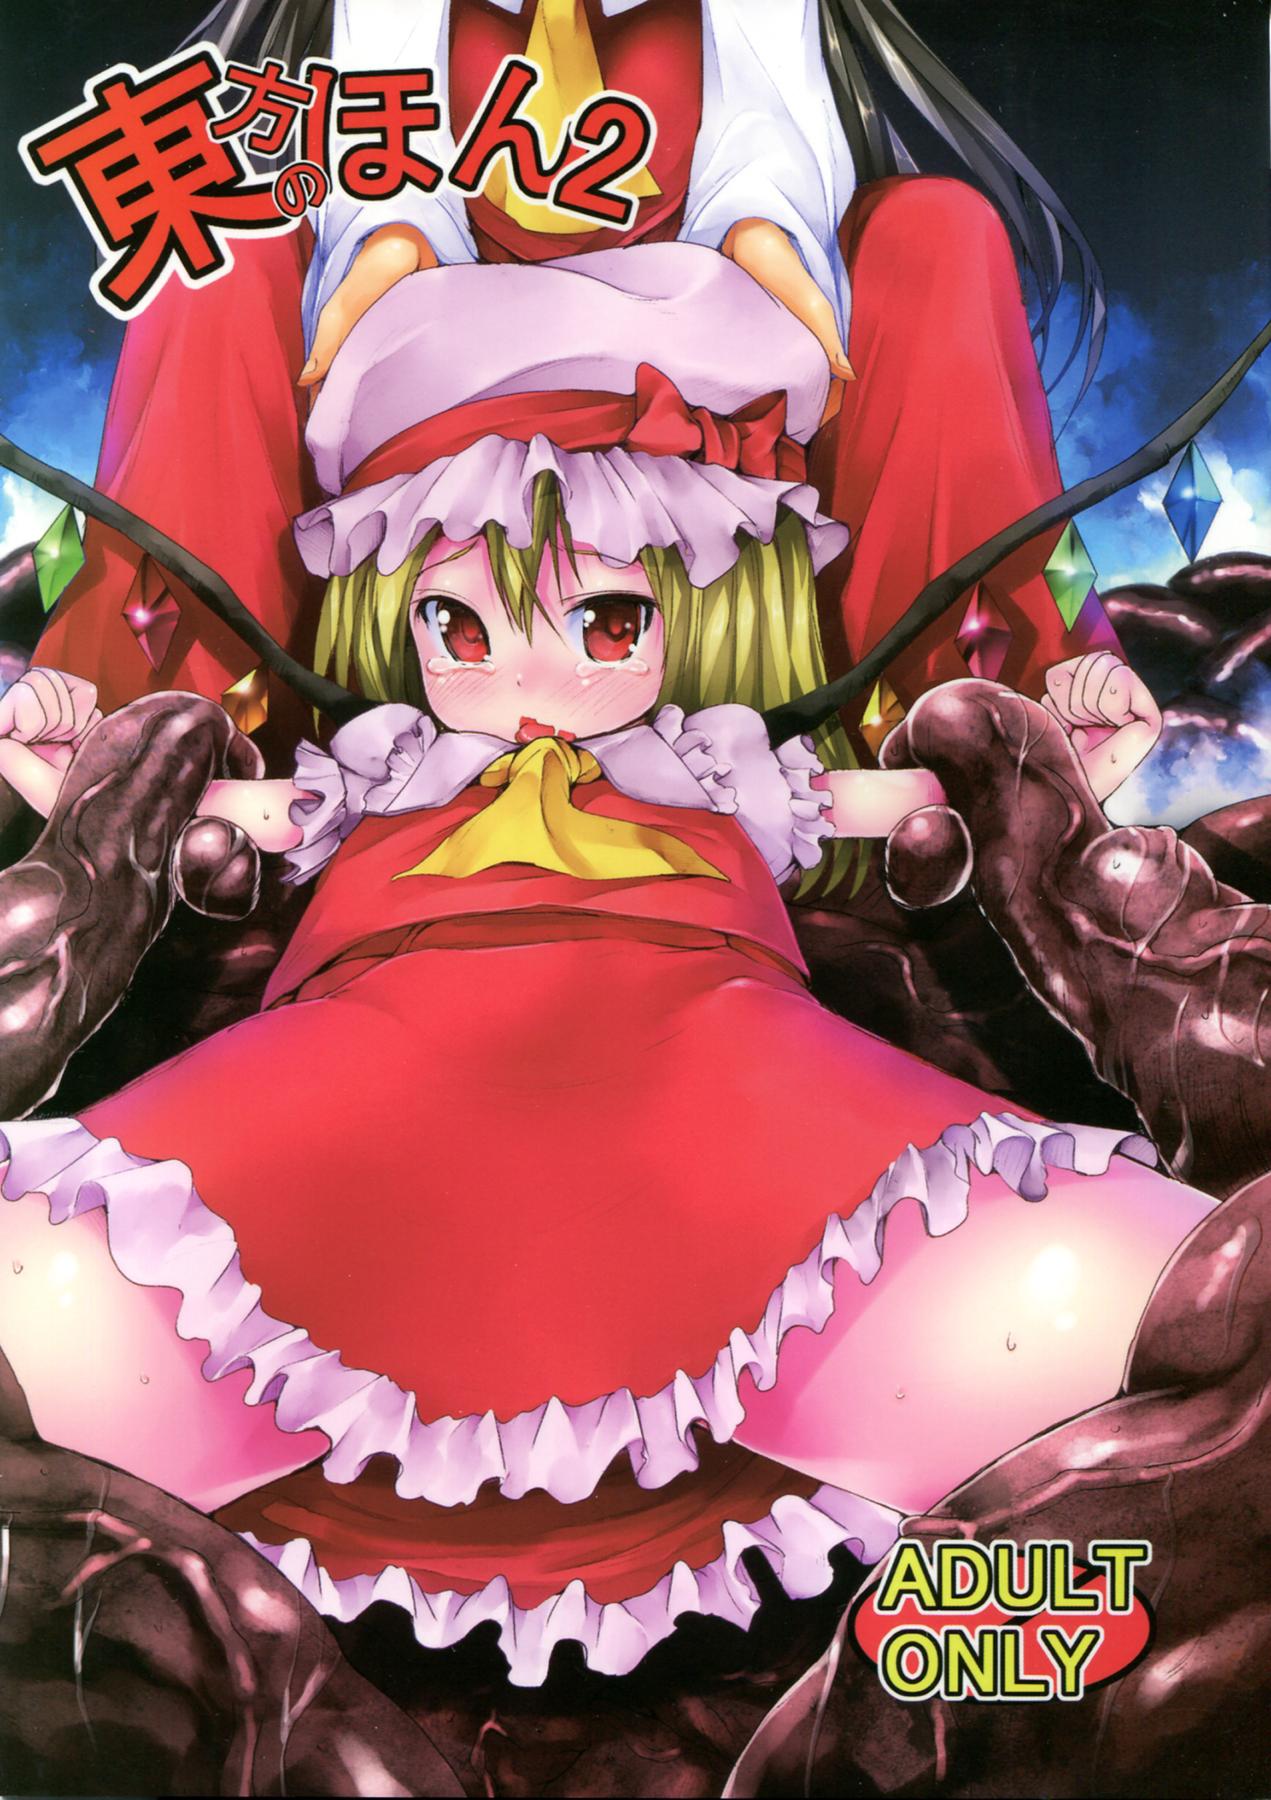 Teamskeet Touhou no hon 2 - Touhou project Tall - Picture 1